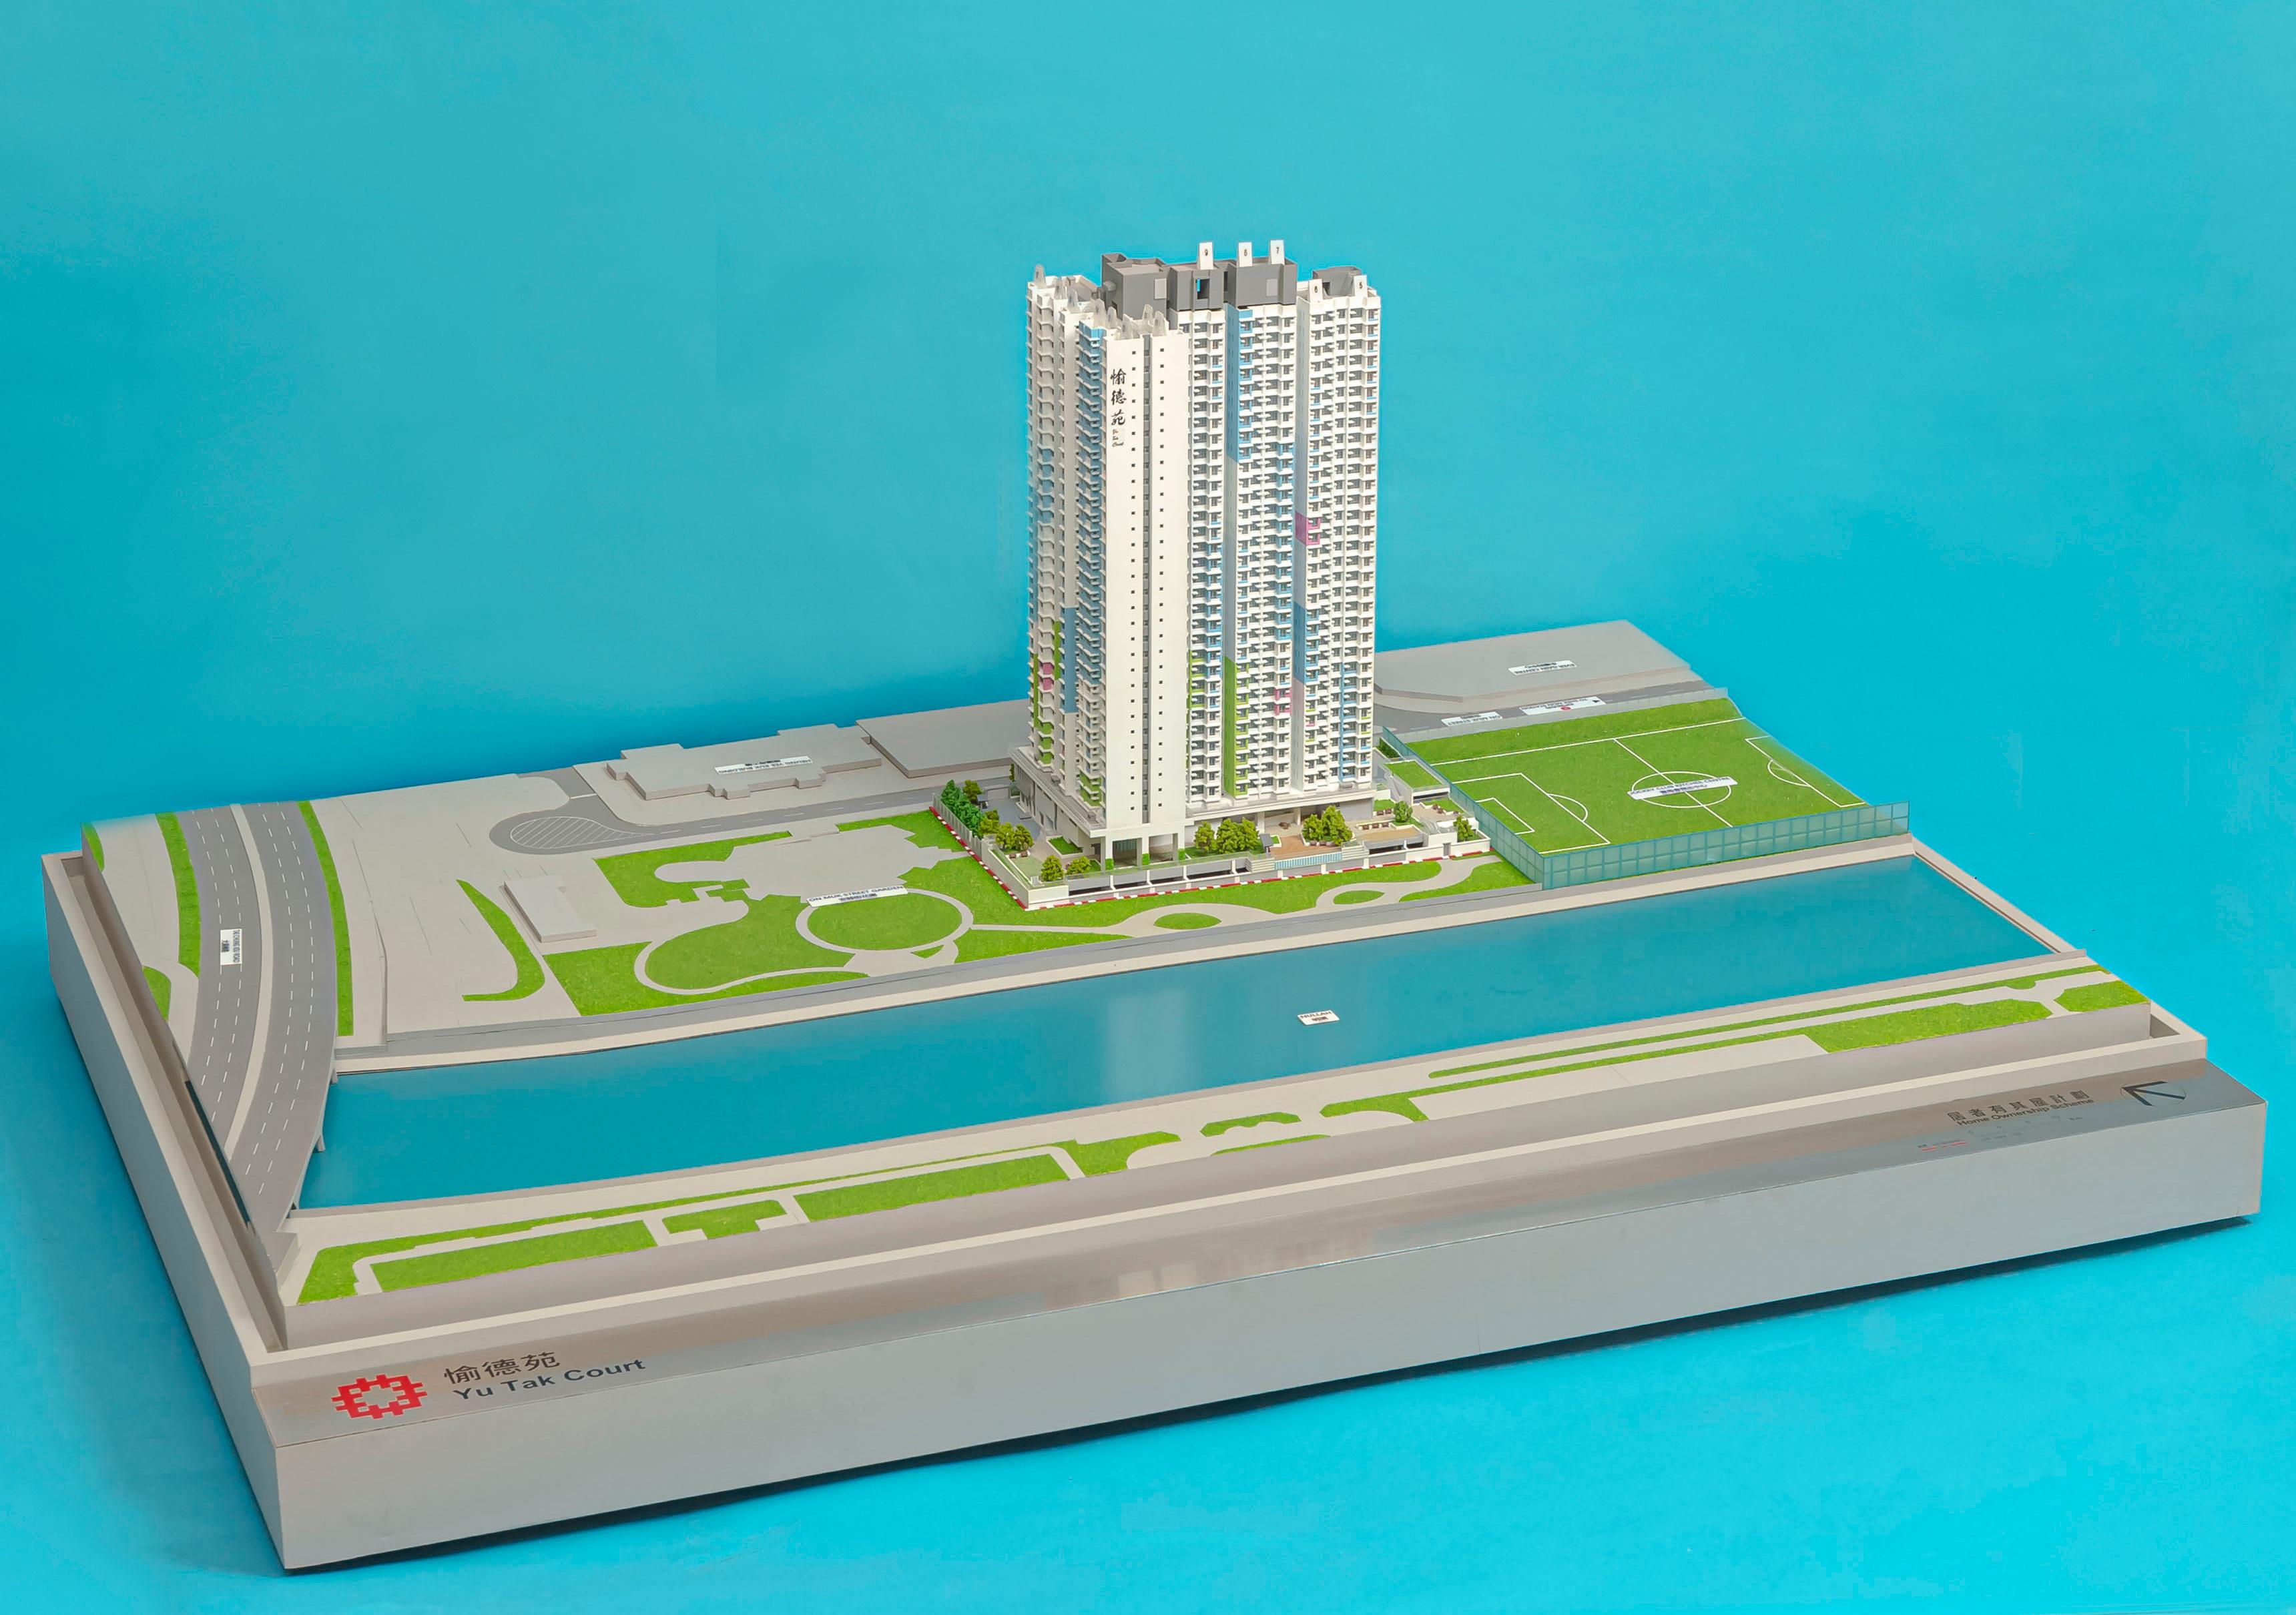 Applications for purchase under Sale of Home Ownership Scheme Flats 2022 will start on February 25. Photo shows a model of Yu Tak Court, which is a development project under the scheme.